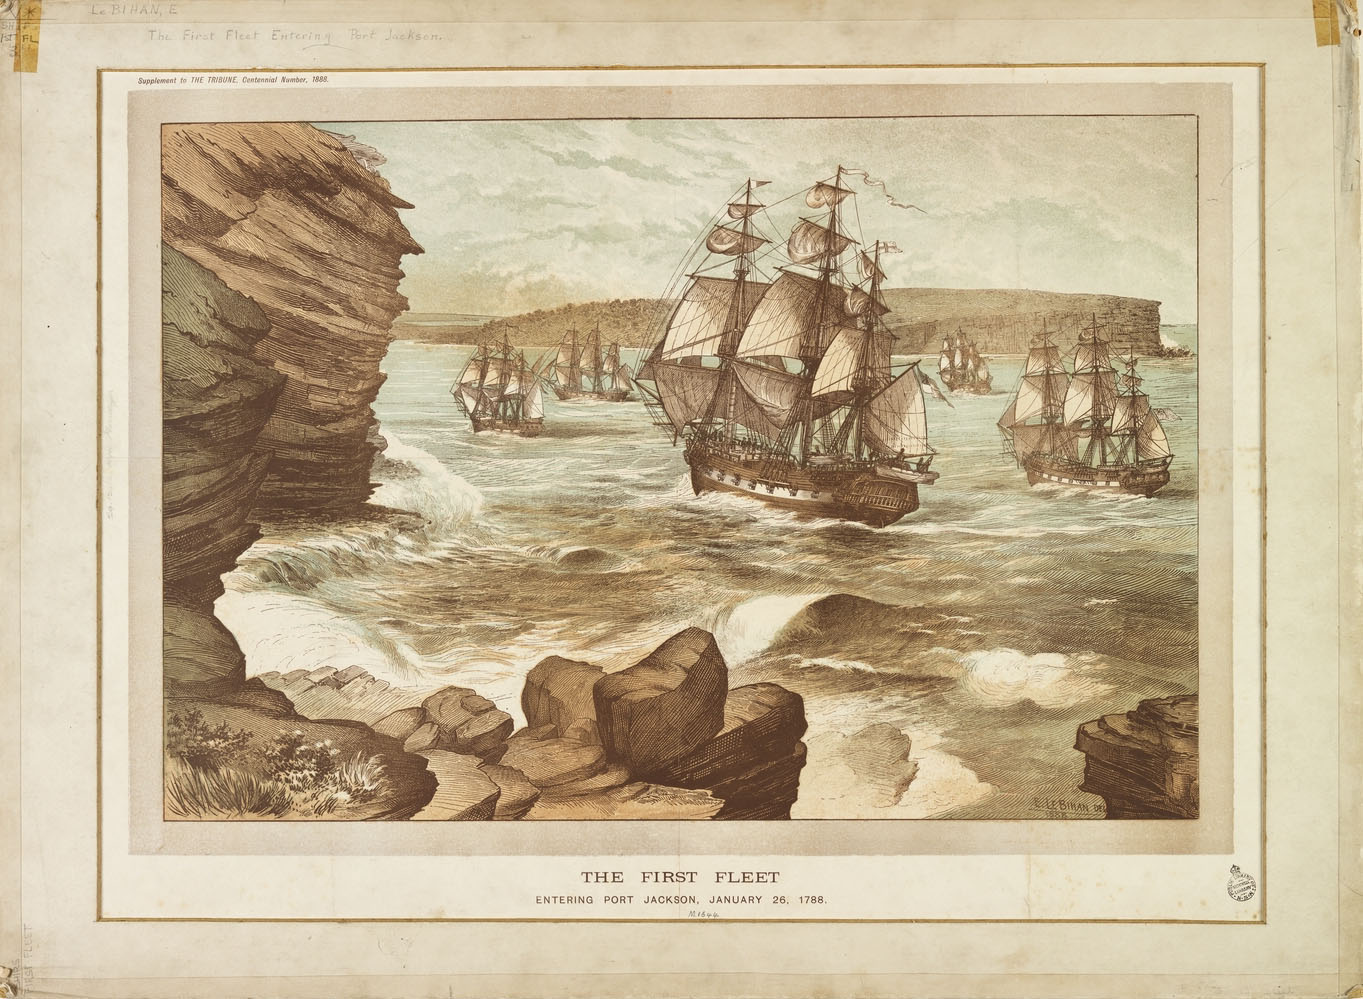 The First Fleet entering Port Jackson, January 26, 1788, by E. Le Bihan. Drawn in 1888